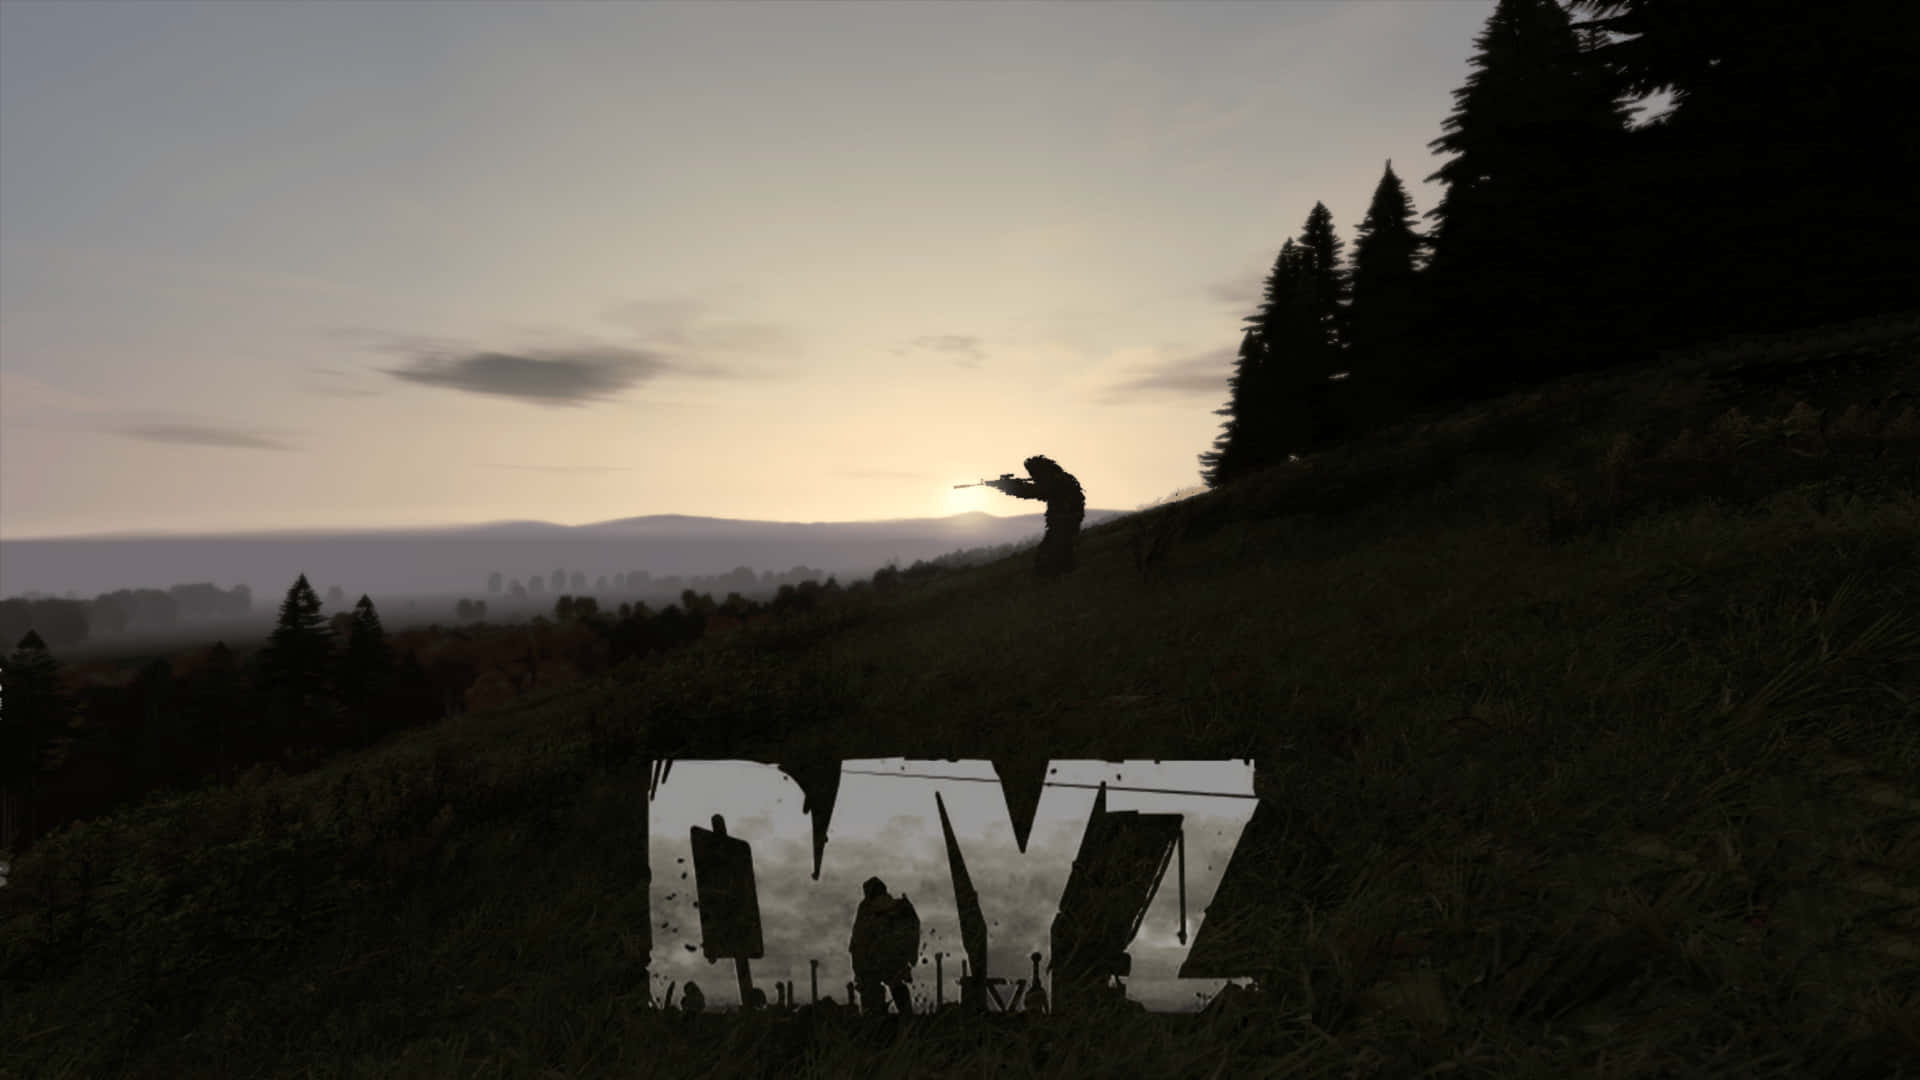 Armed Character Silhouette 4k Dayz Epoch Mod Background